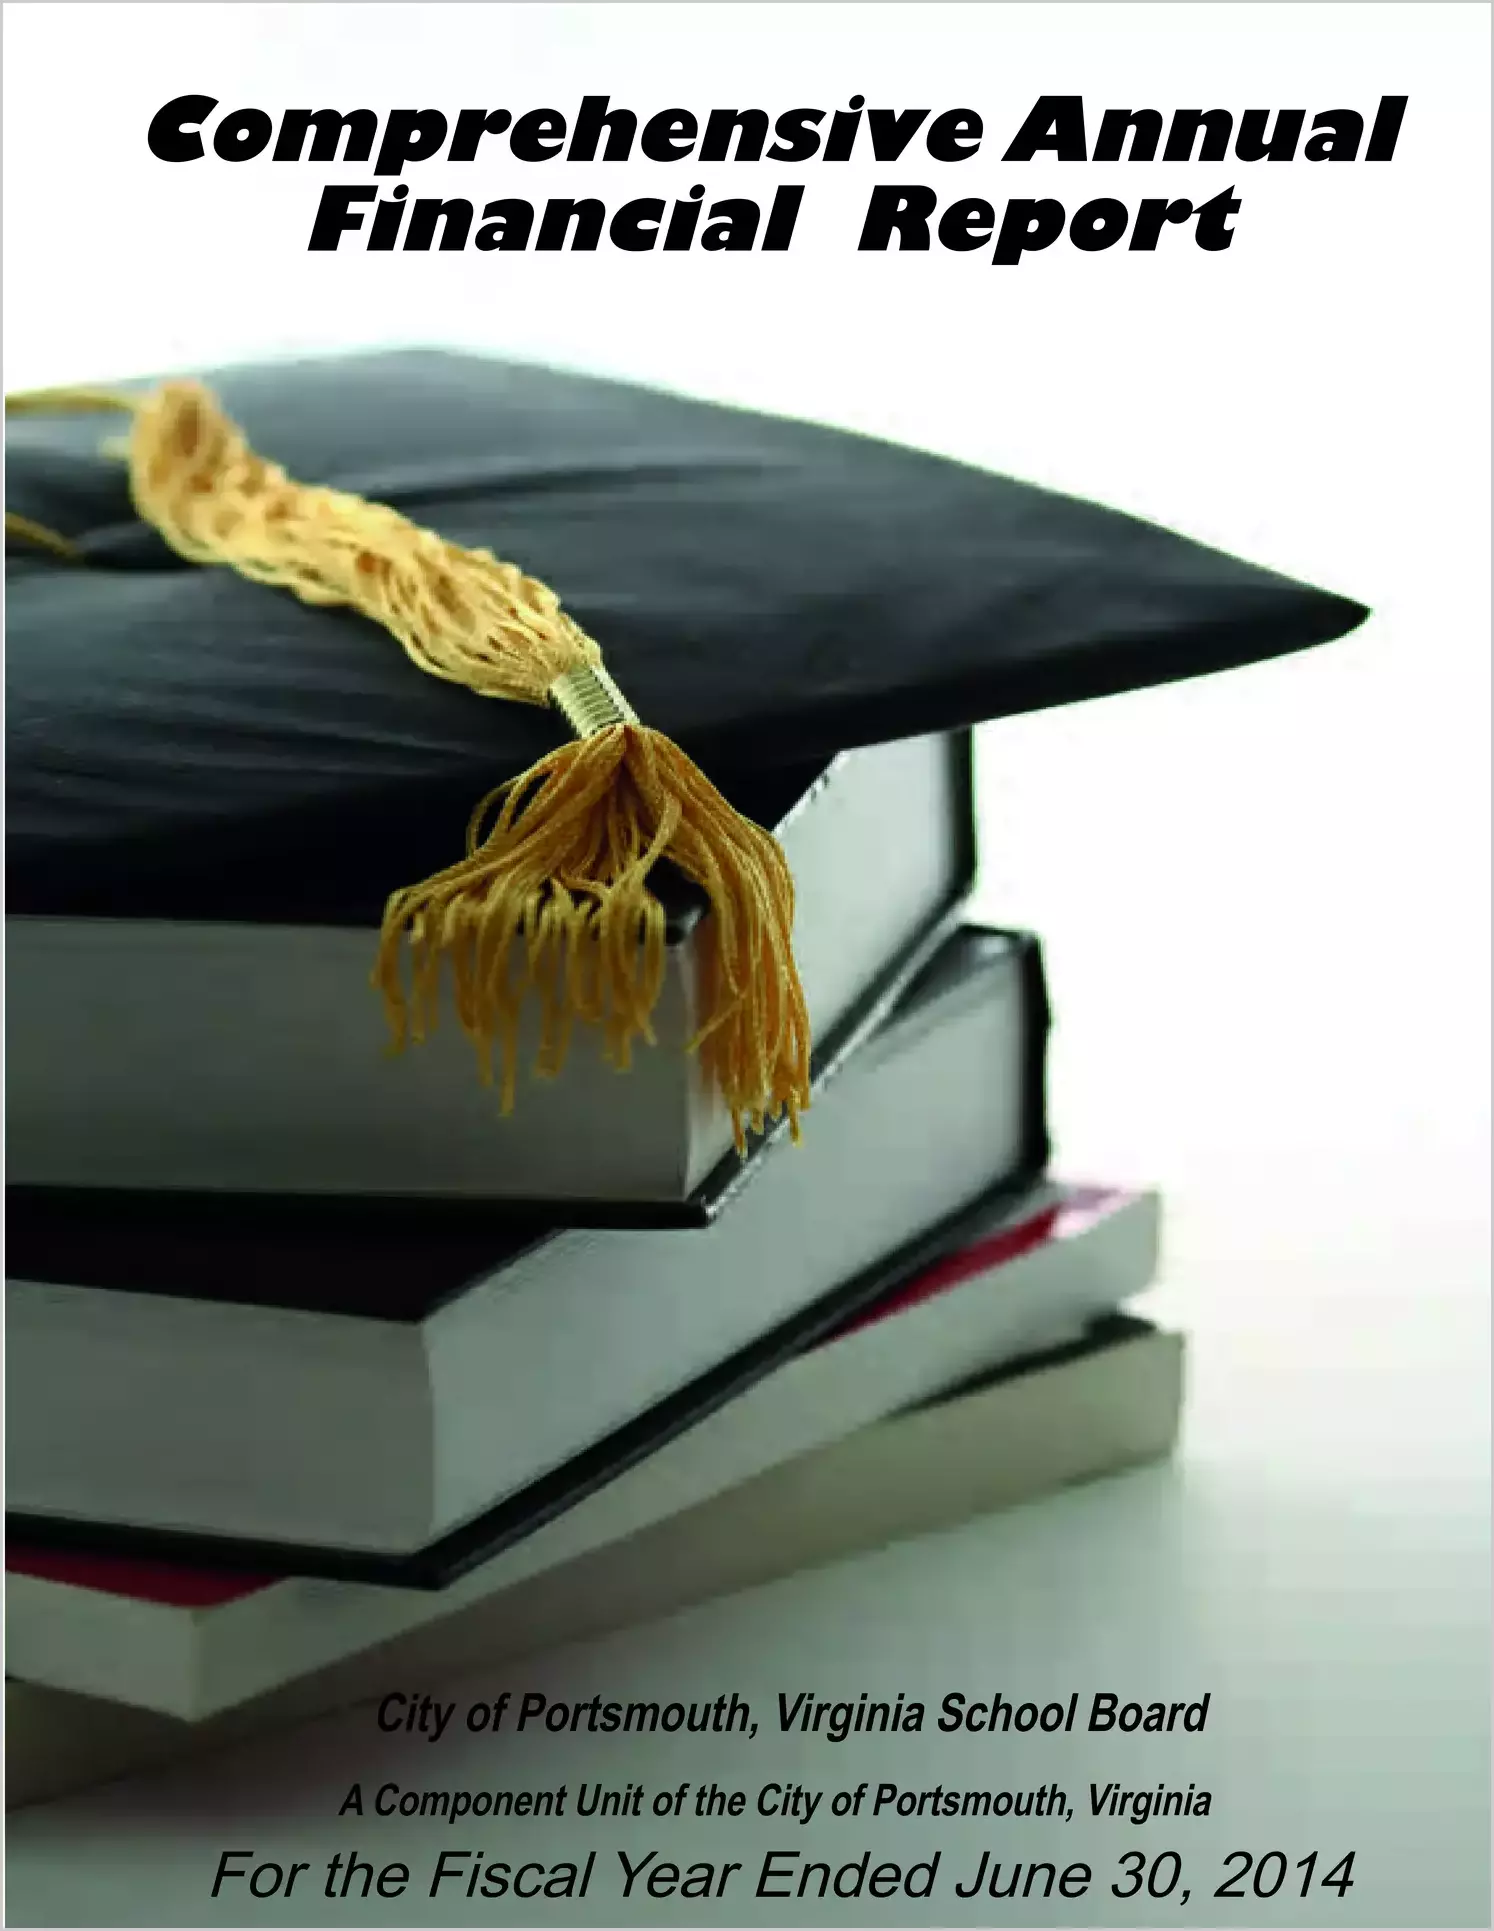 2014 Public Schools Annual Financial Report for City of Portsmouth